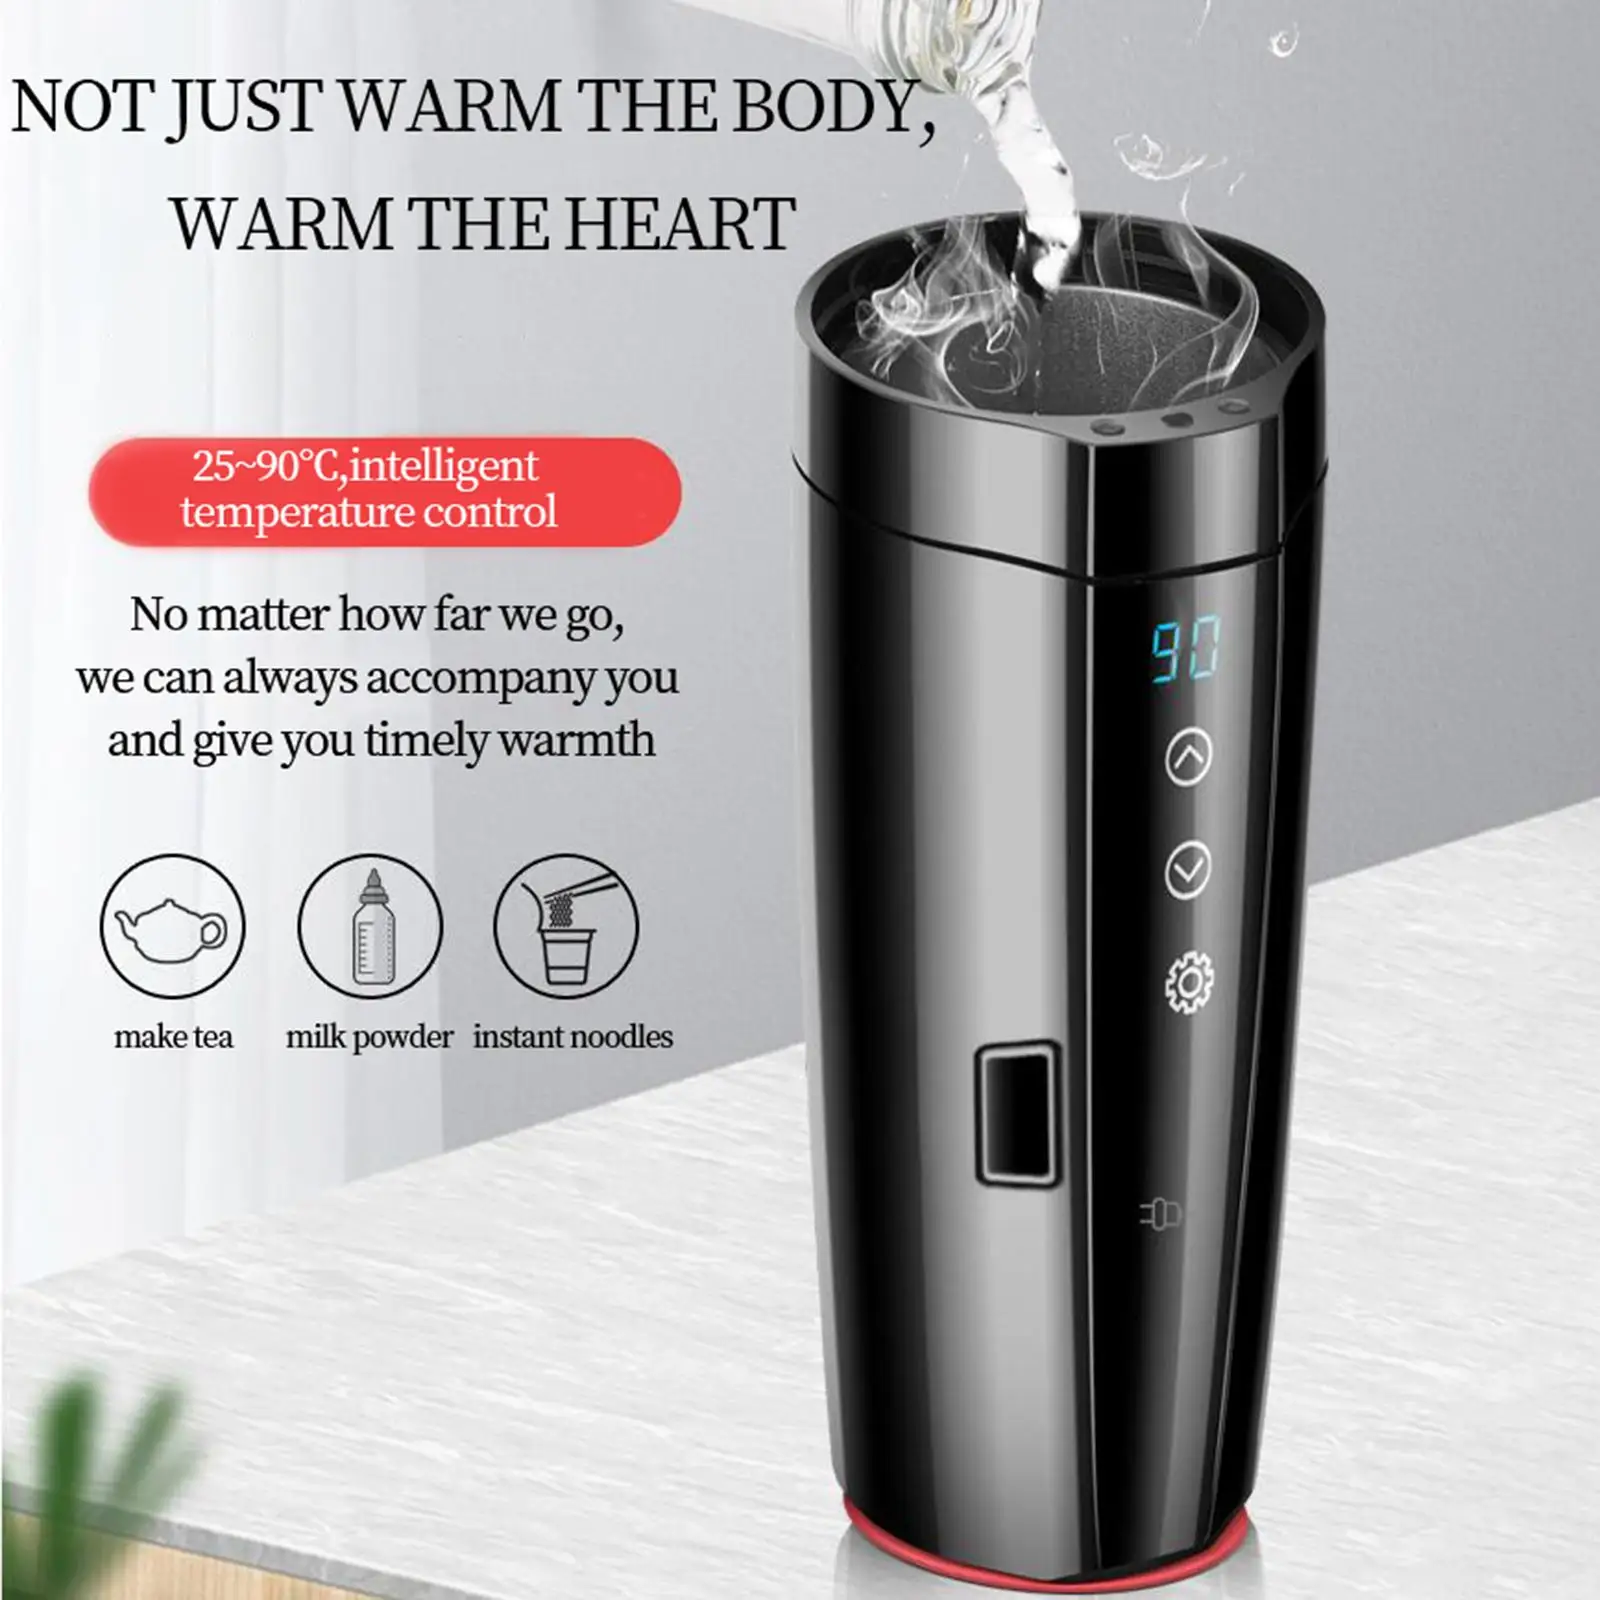 Portable 12V/24V Car Kettle Boiler Temperature Display Warmer Electric Heated Water Boiler for Milk Outdoor Camping Travel